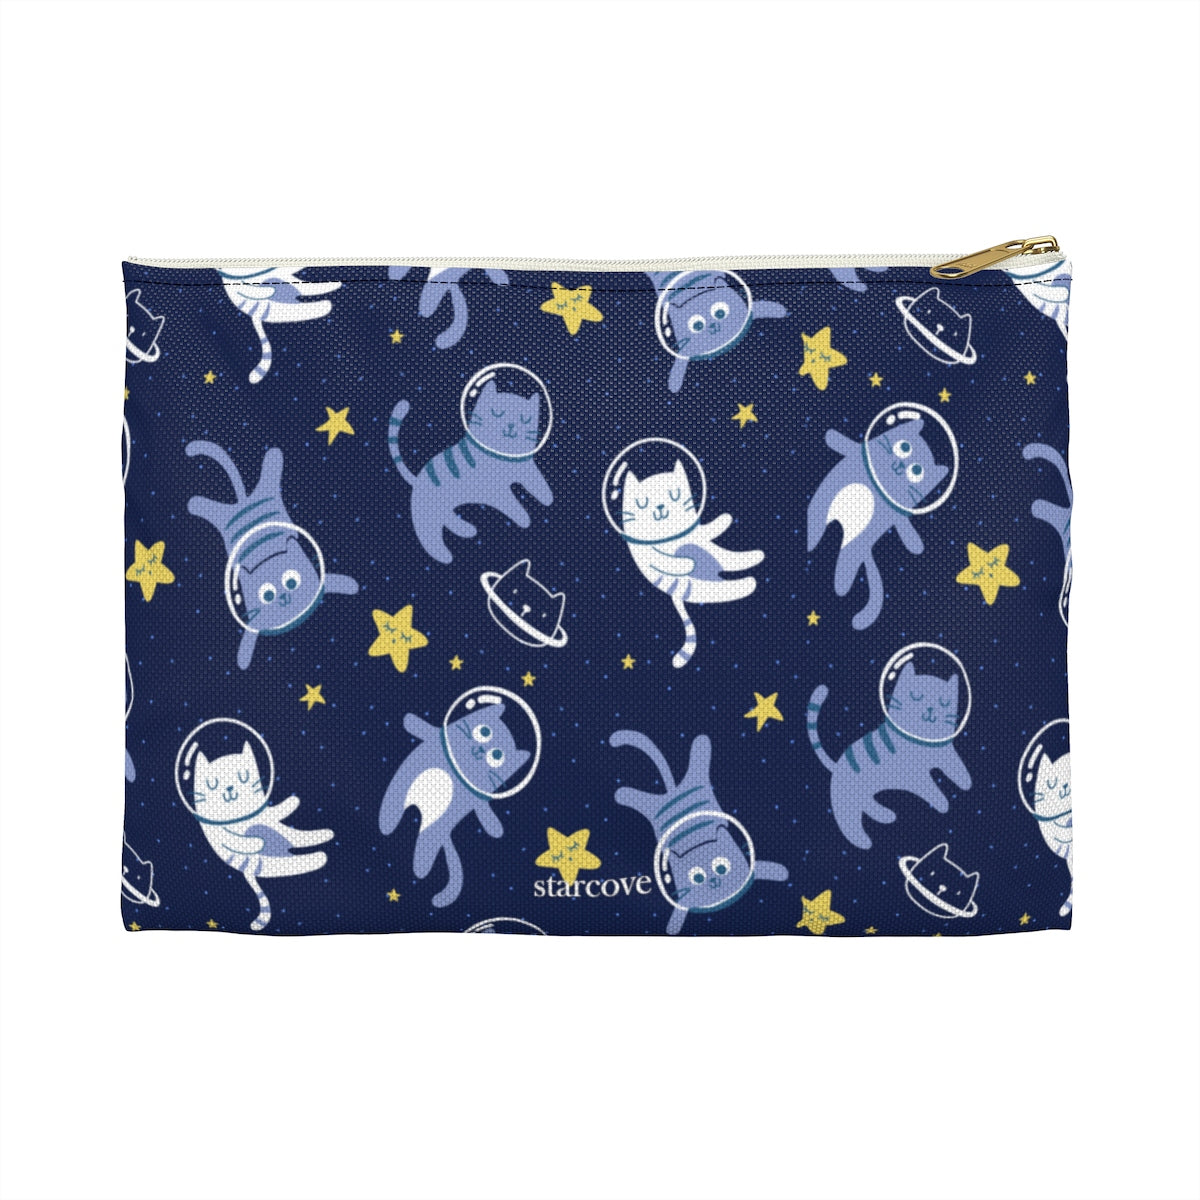 Cute Cats in Space Coin Purse, Cute Stars Space Makeup Bags Fun Cosmetic Travel Pouch Organizer Gifts for women, Accessory Pouch Pencil Case Starcove Fashion